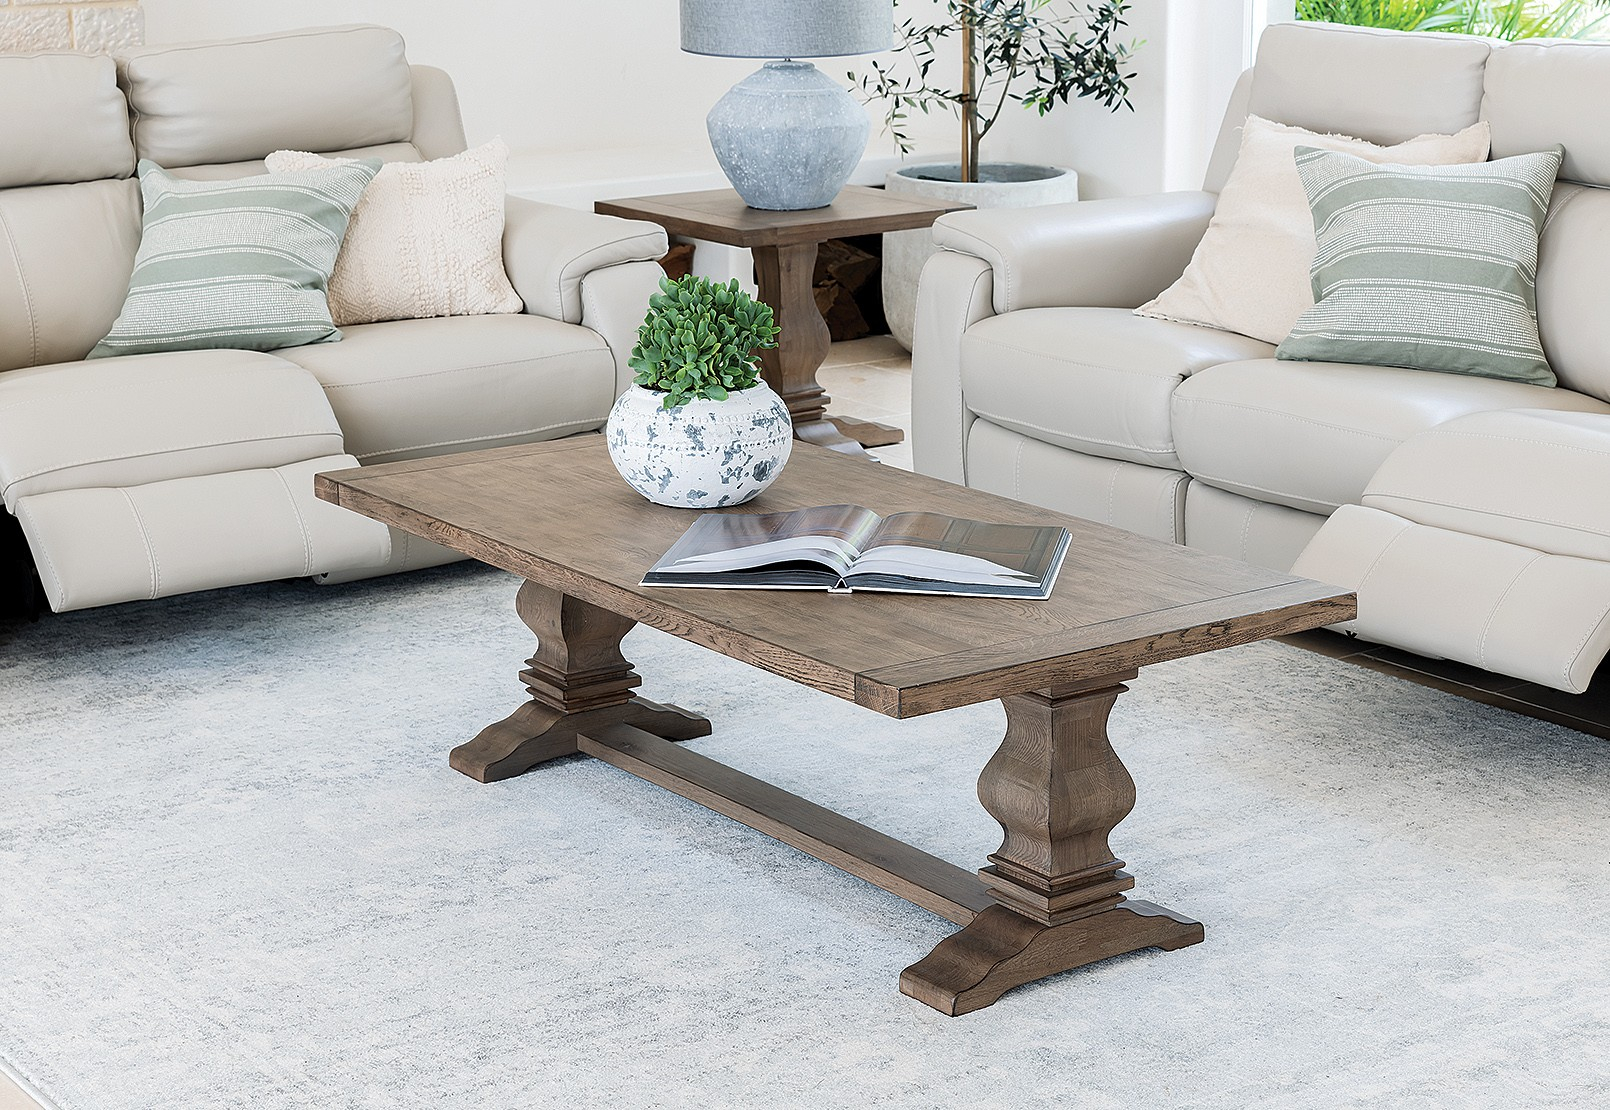 La Salle Coffee Table Amart Furniture throughout size 1610 X 1110